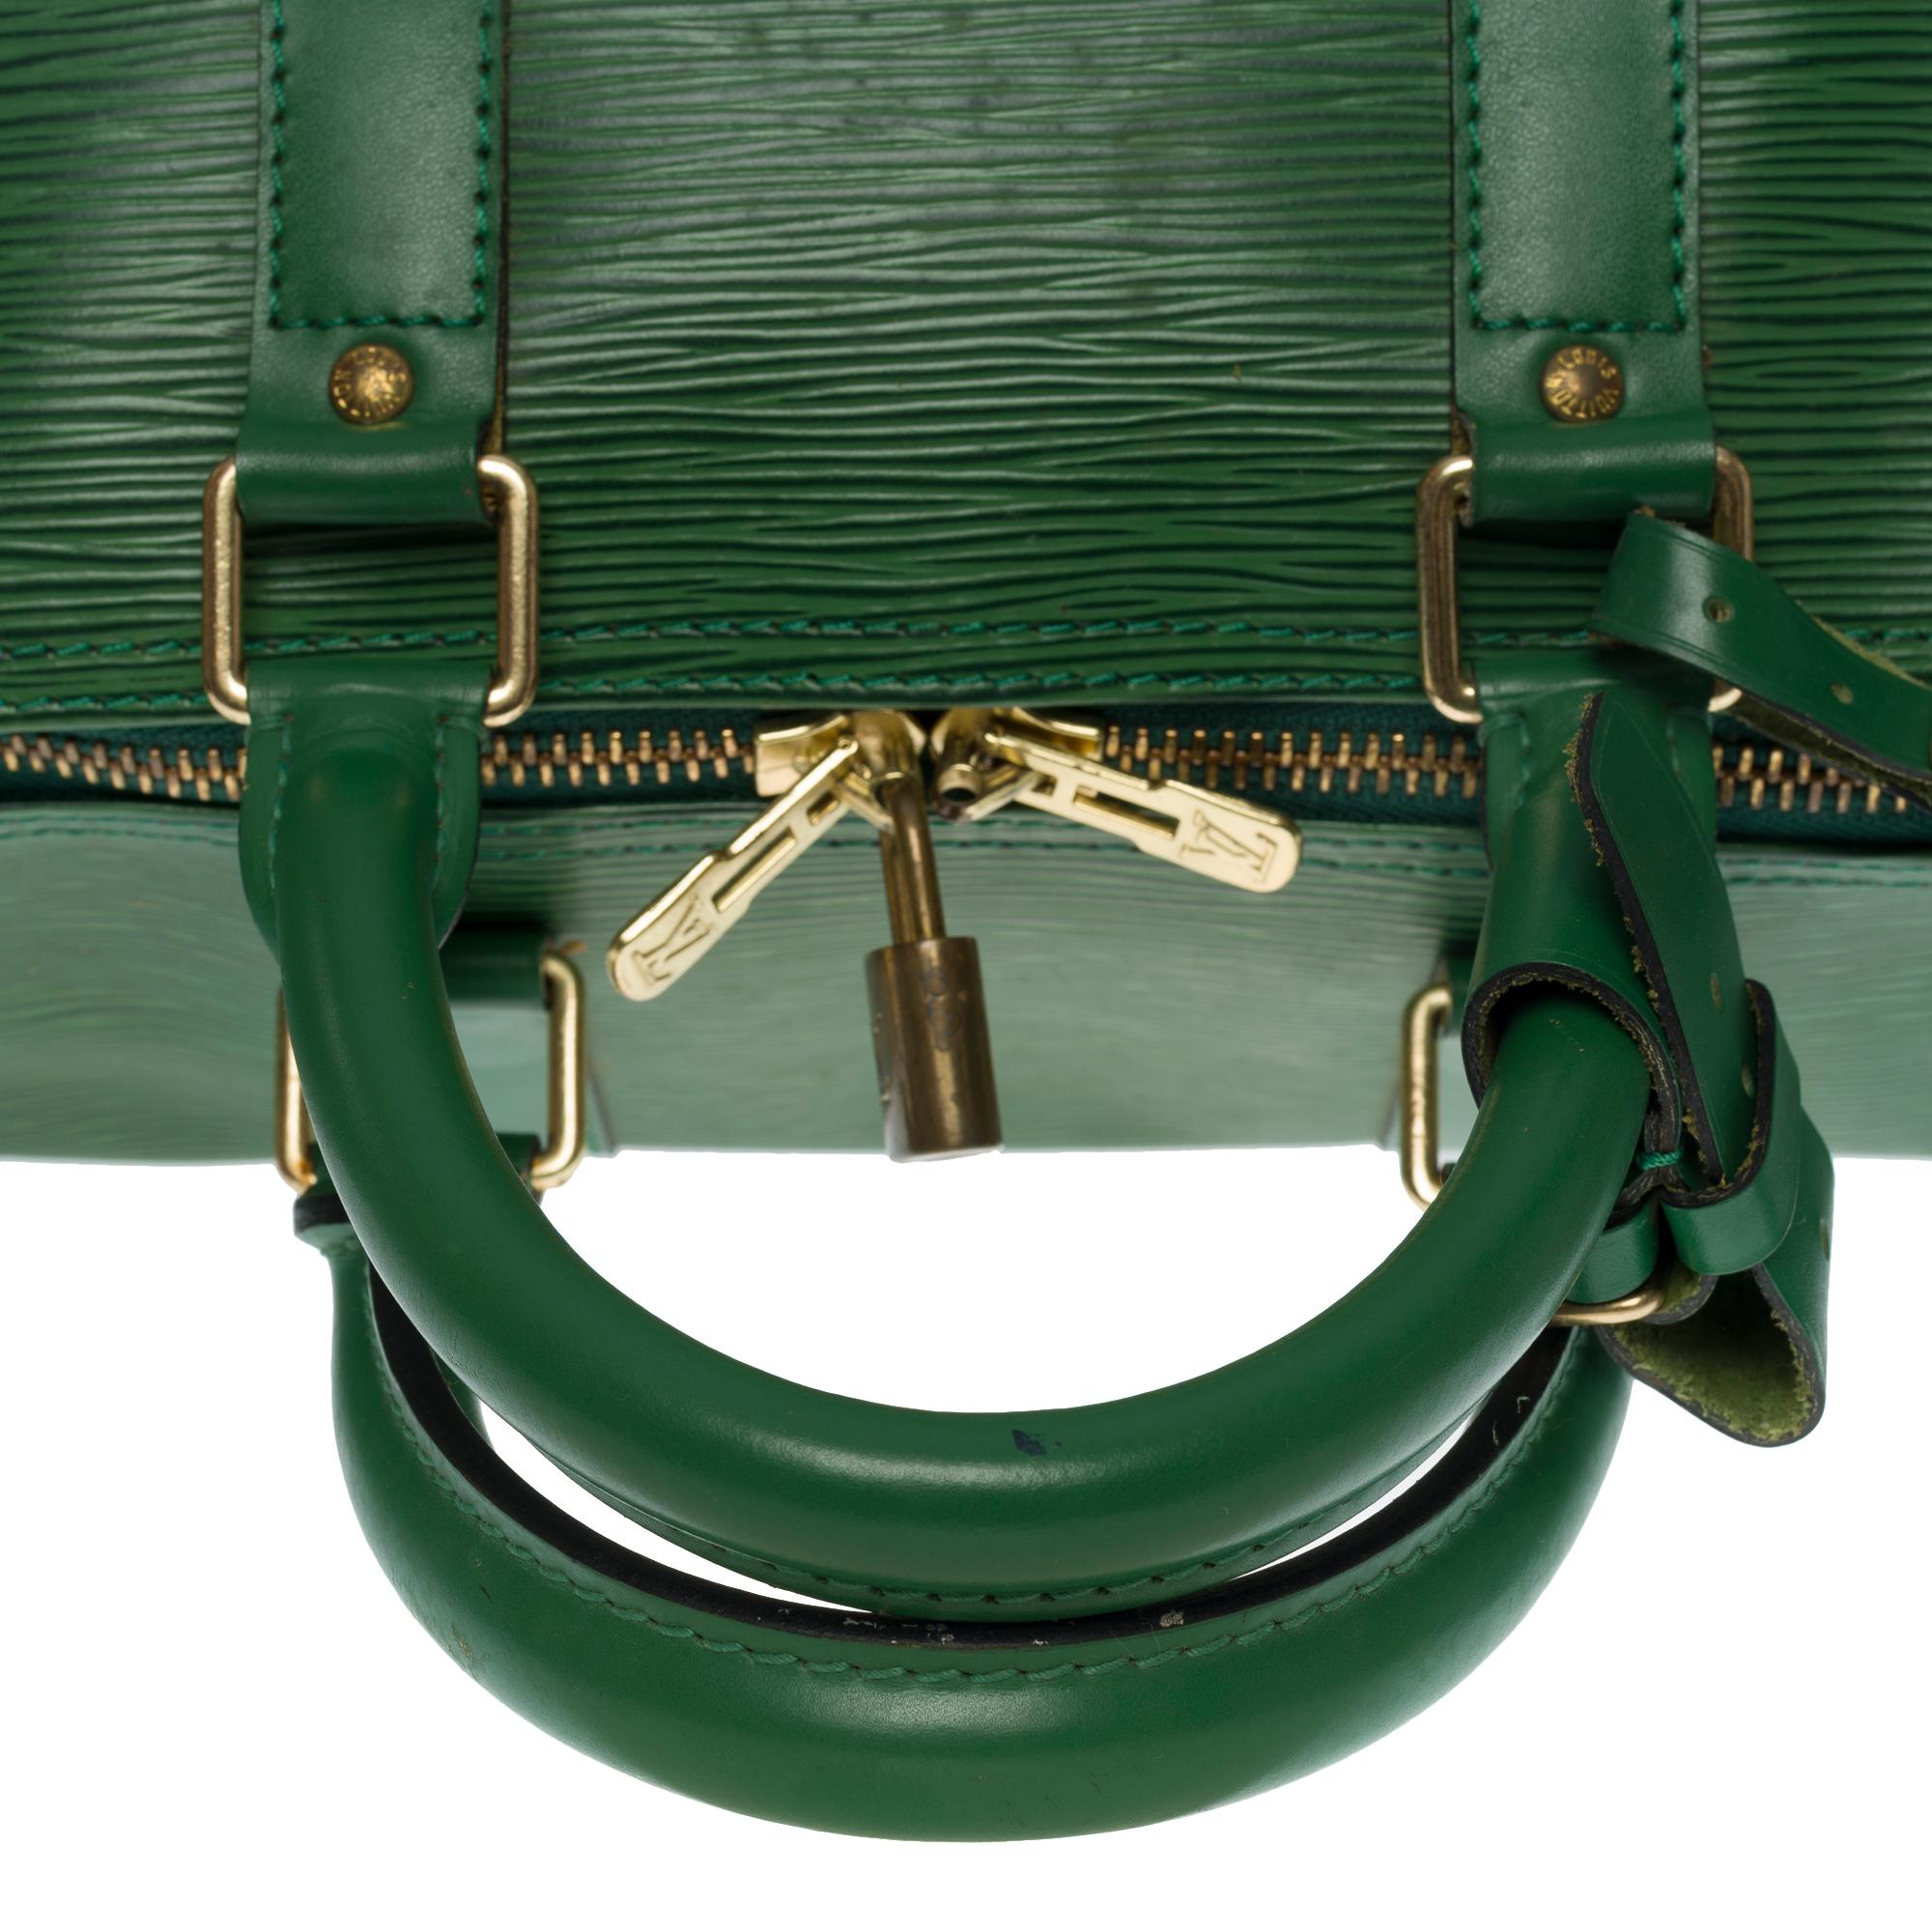 The very Chic Louis Vuitton Keepall 45 Travel bag in Green epi leather, GHW 4